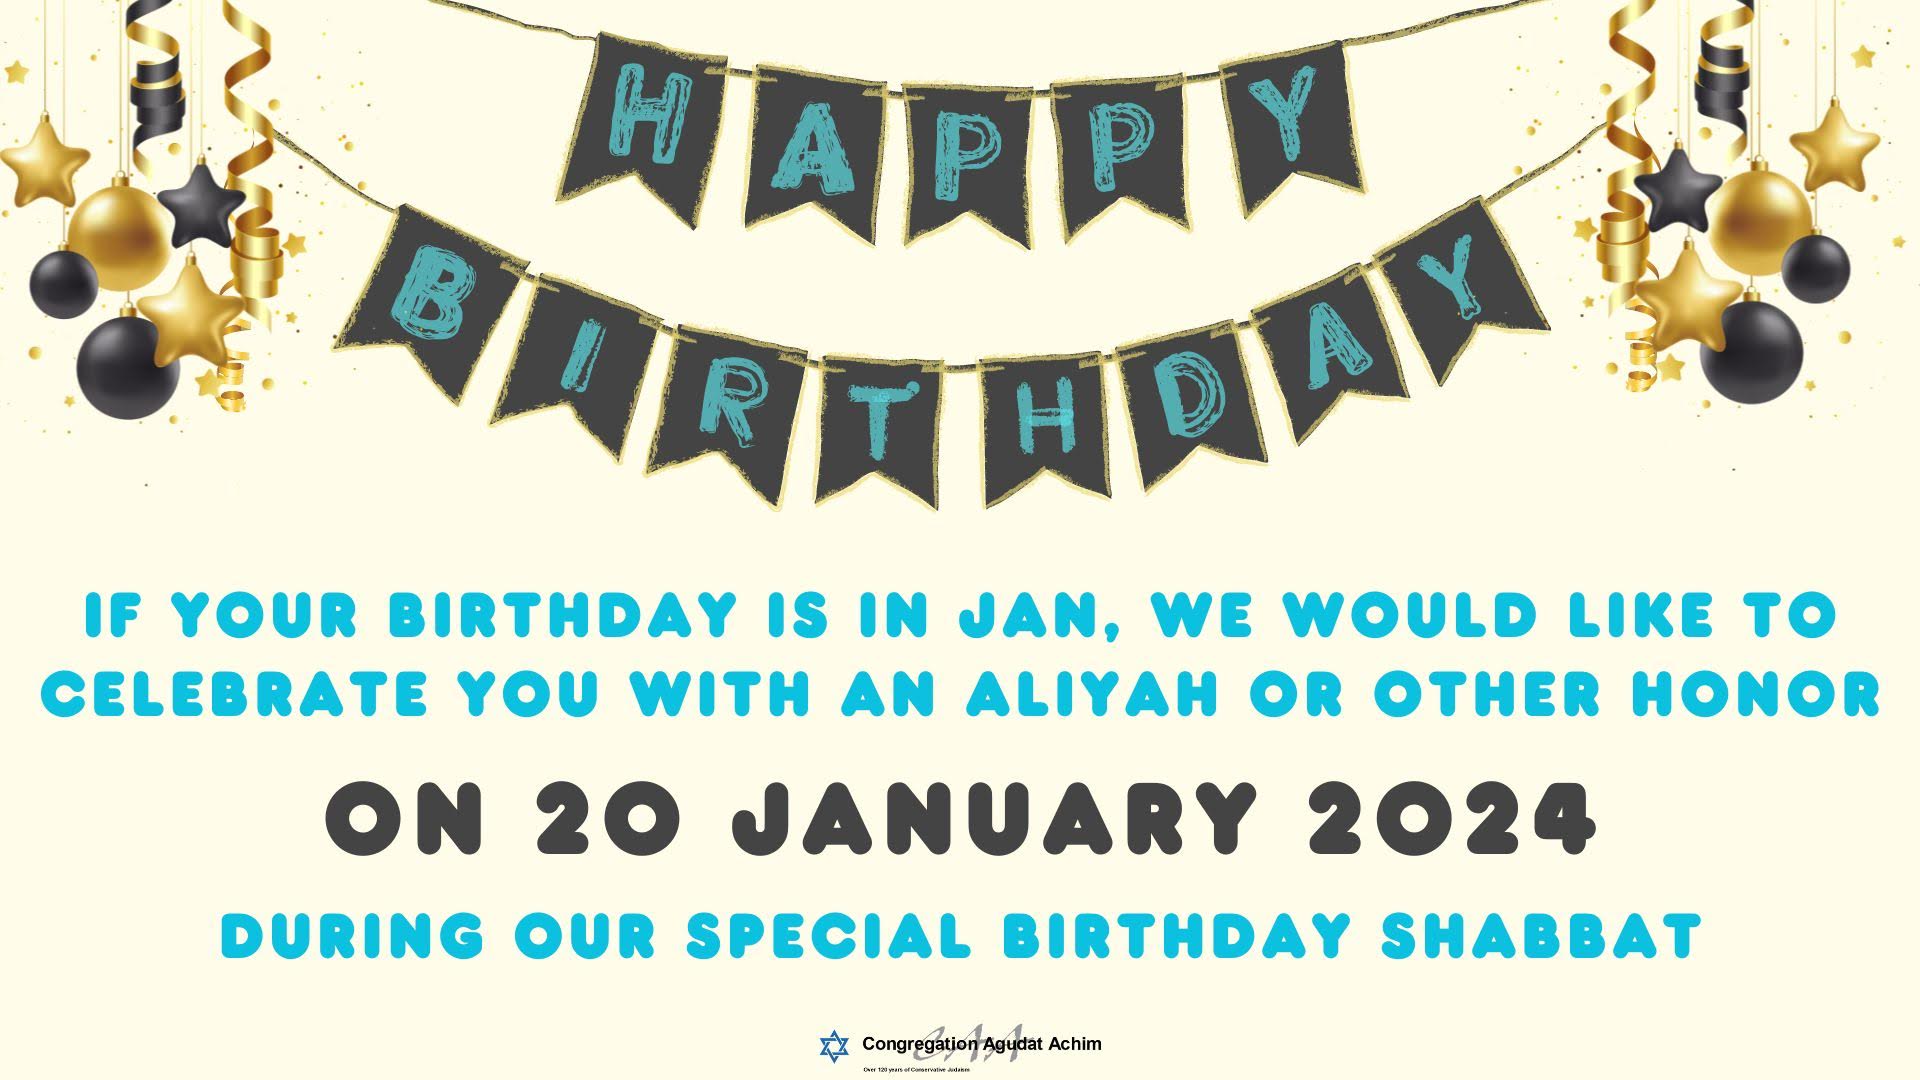 Celebrate and attend Shabbat morning services in January as we honor our congregants' birthdays